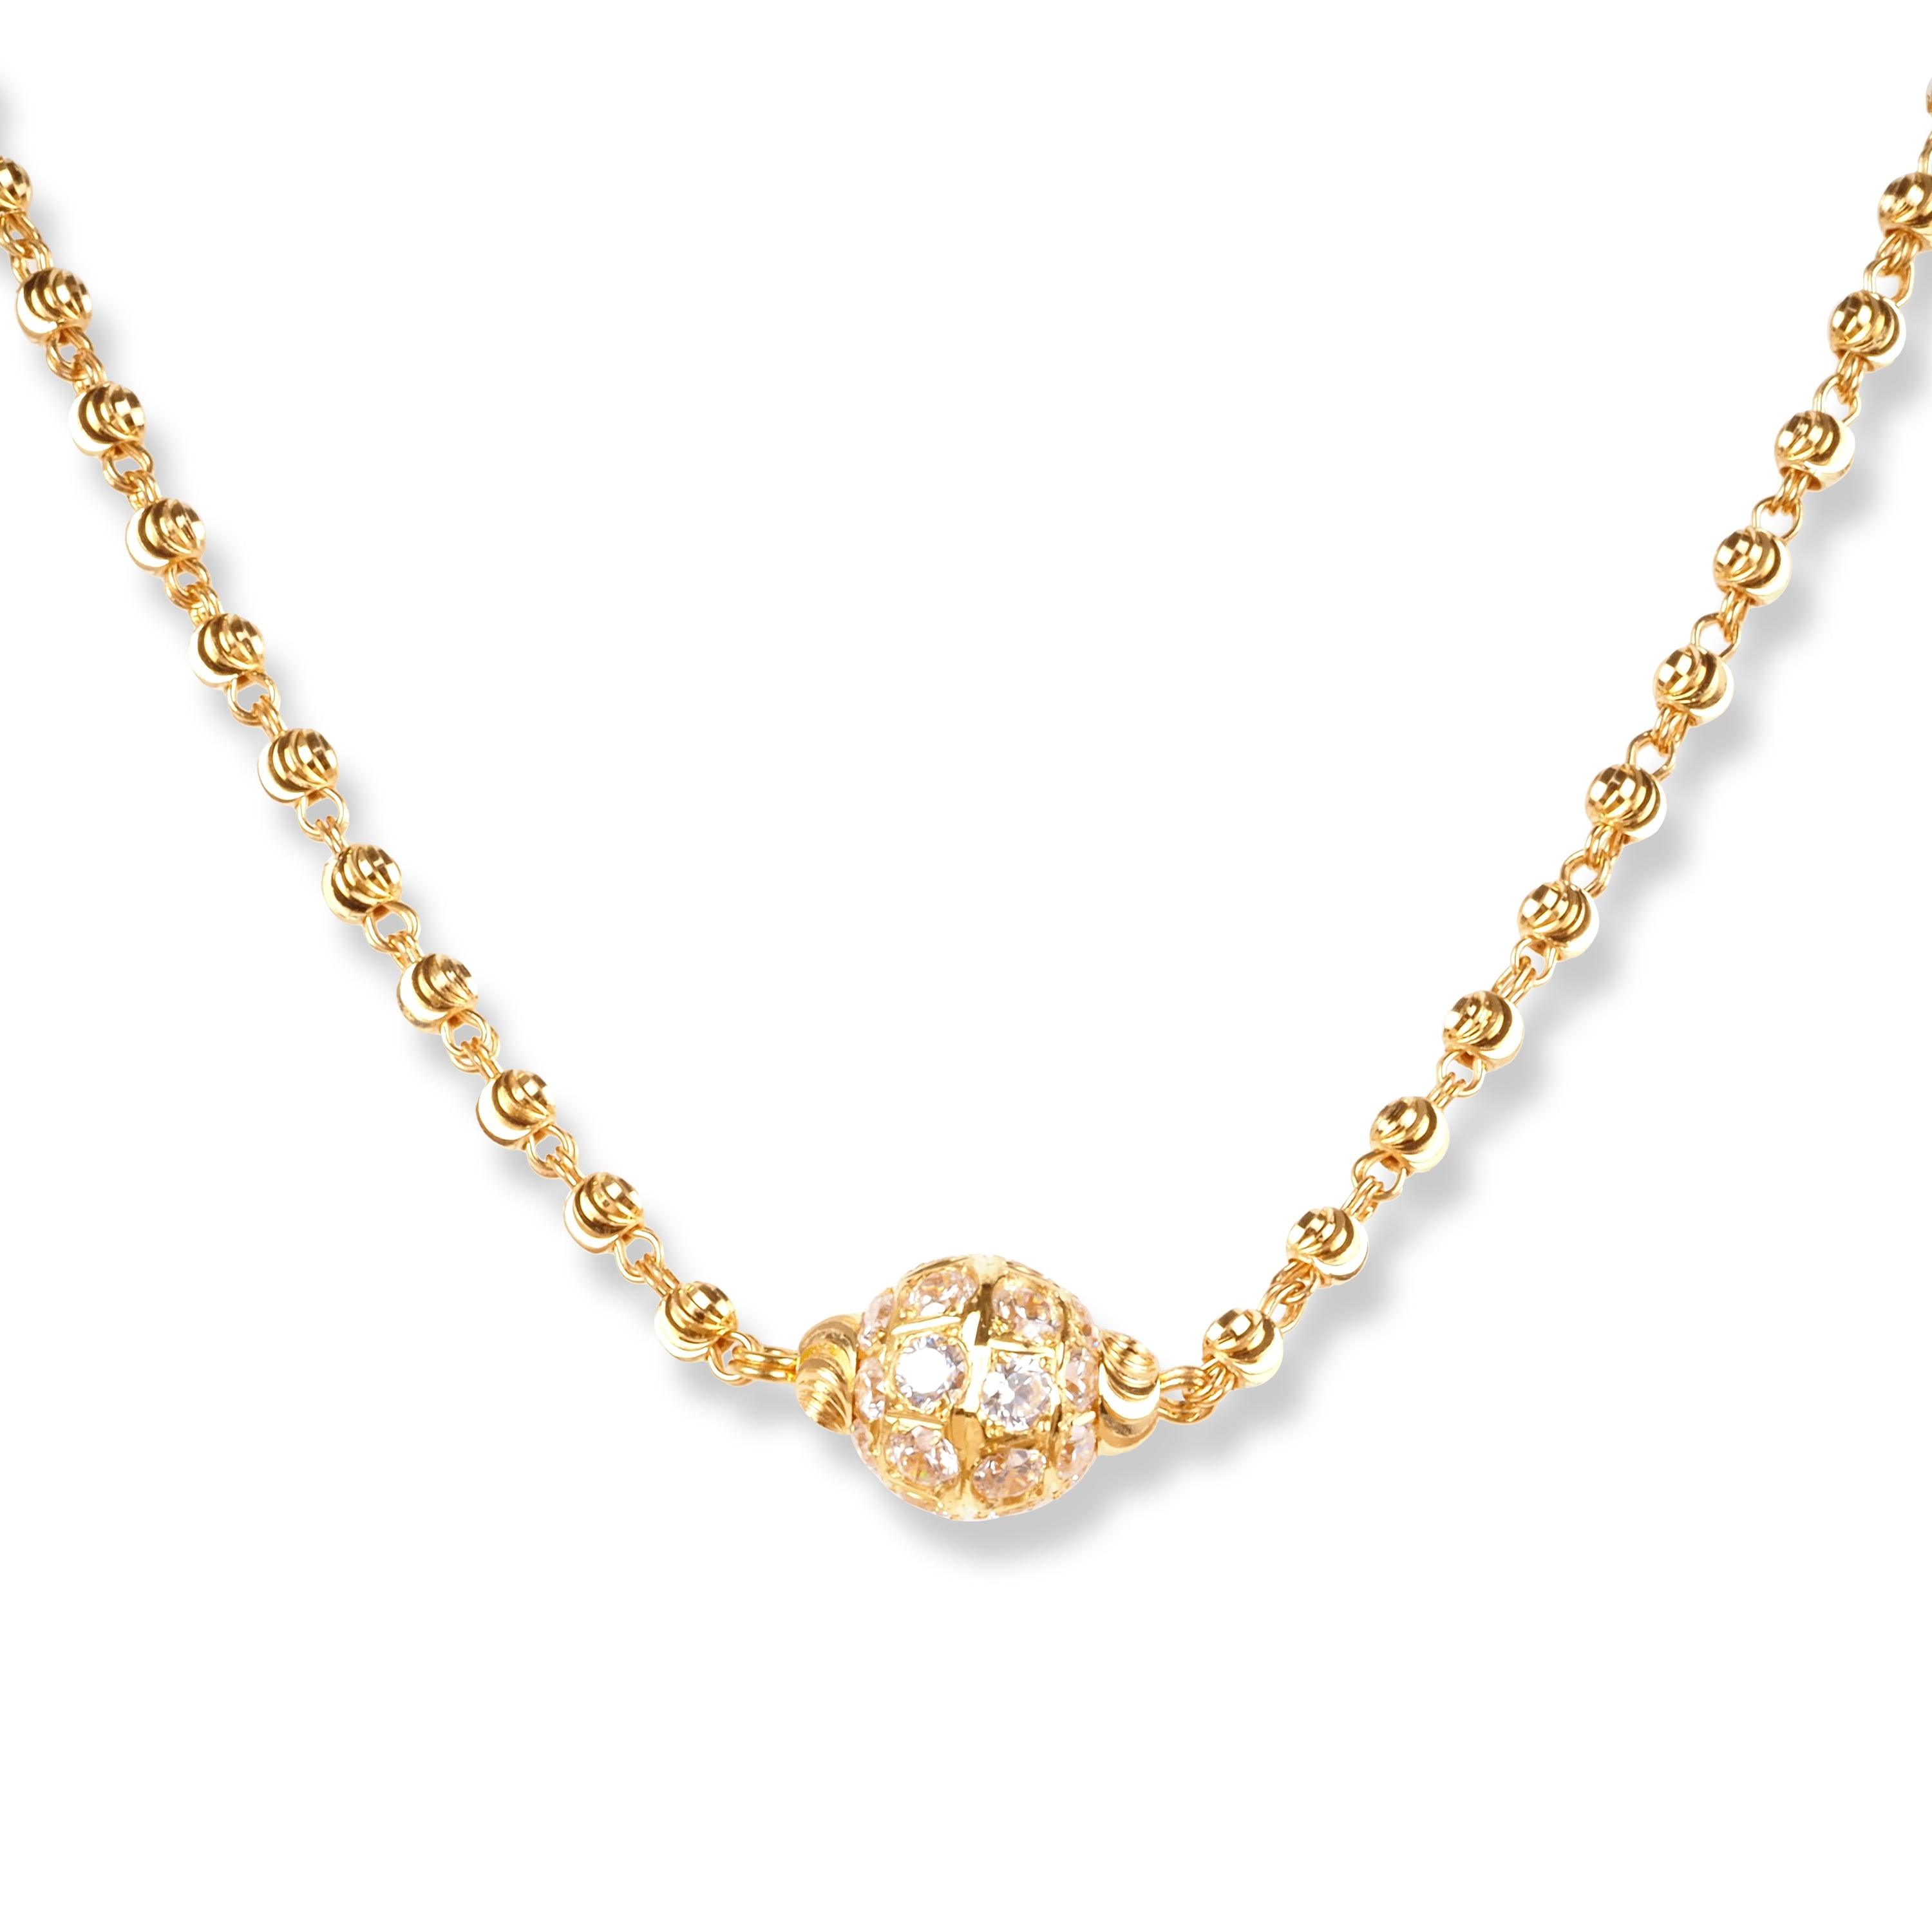 22ct Gold Necklace with Cubic Zirconia Stones and Single Bead N-7899 - Minar Jewellers